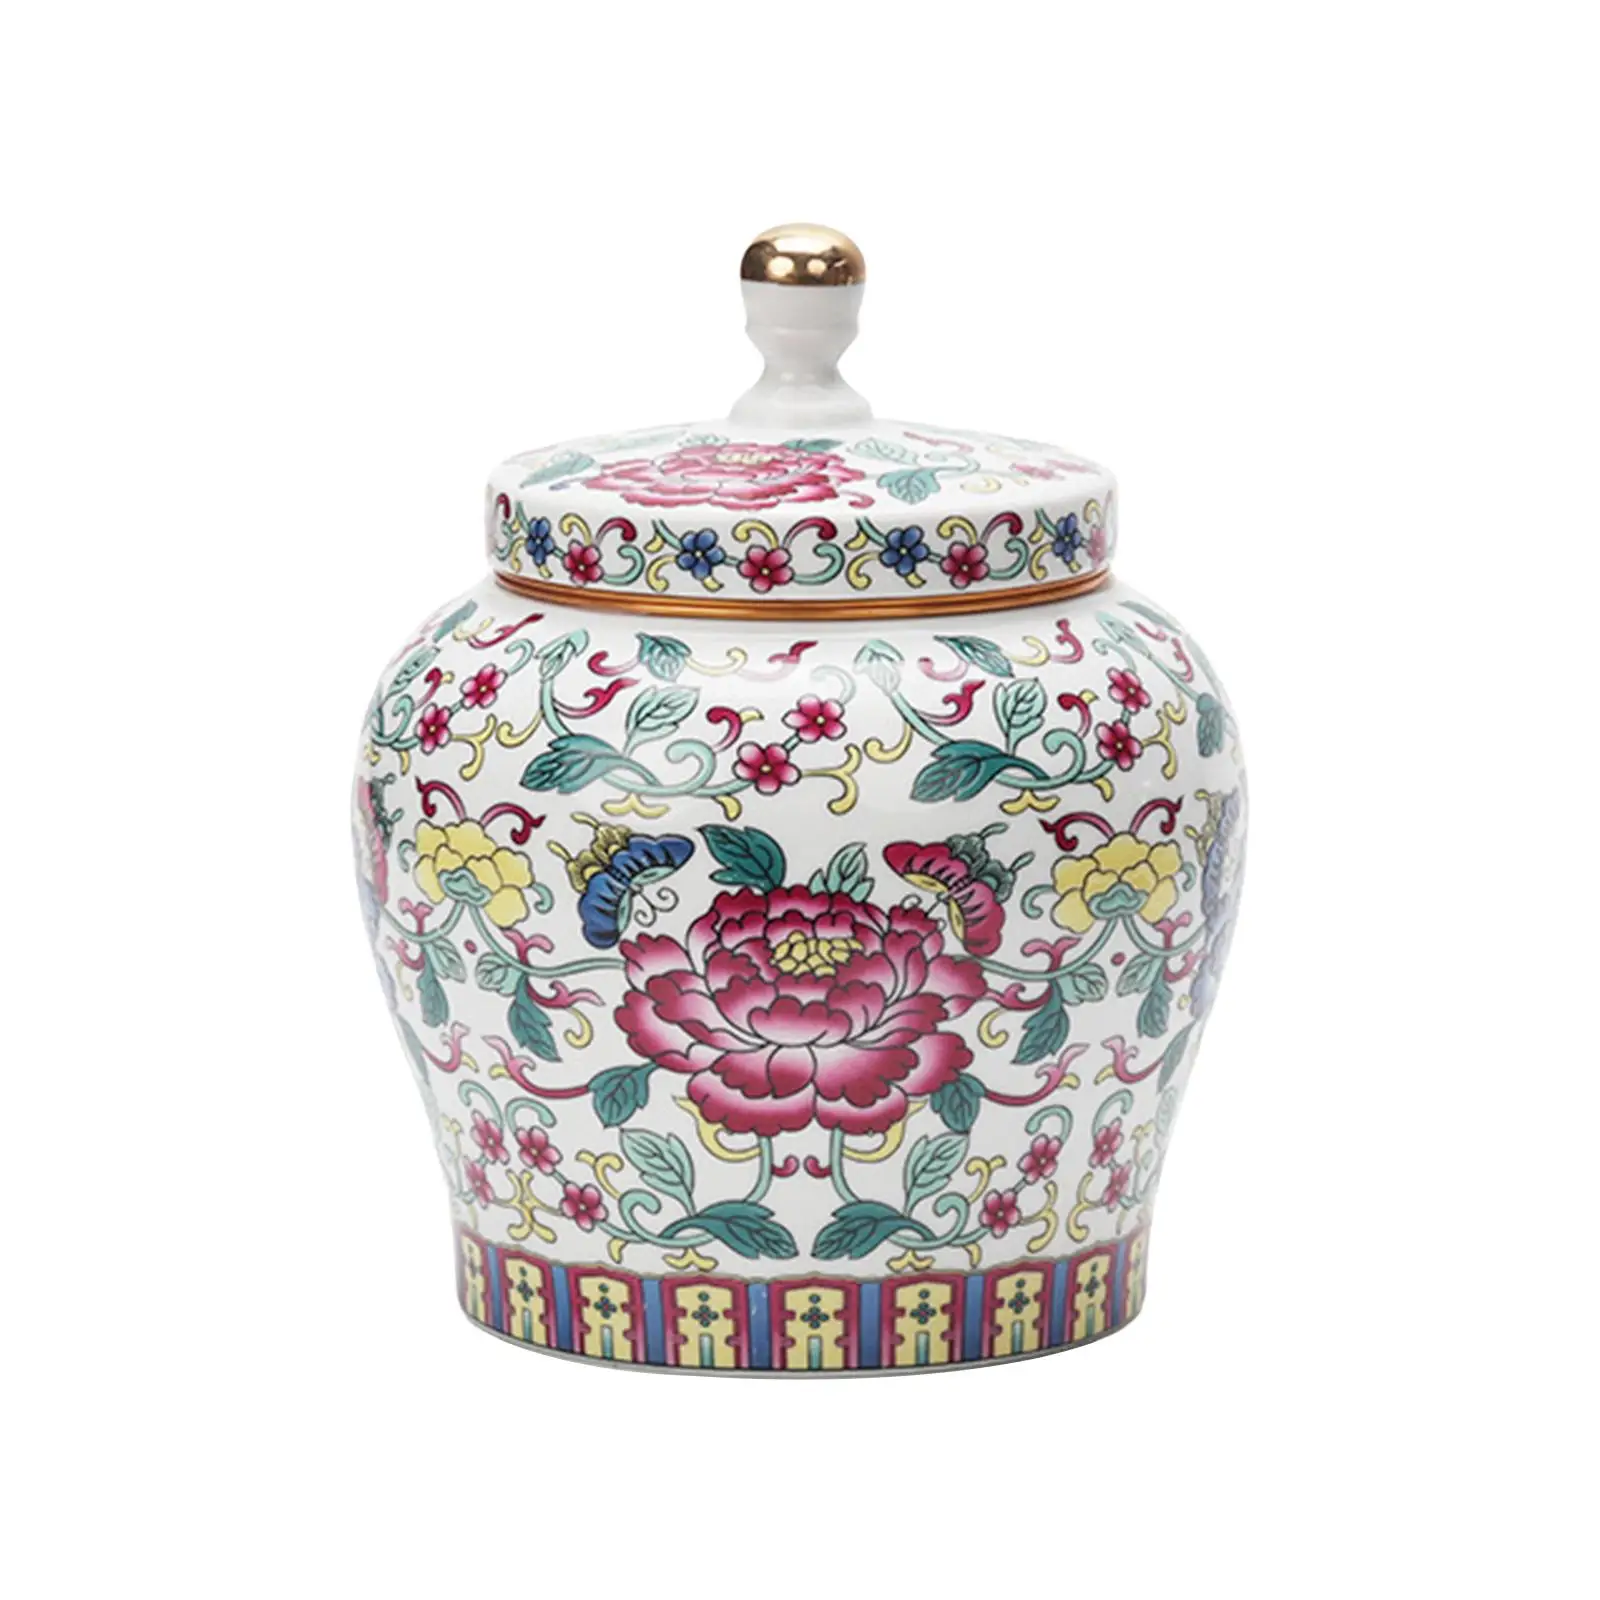 Porcelain Tea Canister Glazed Household Storage Jar Can Store Your Treasures